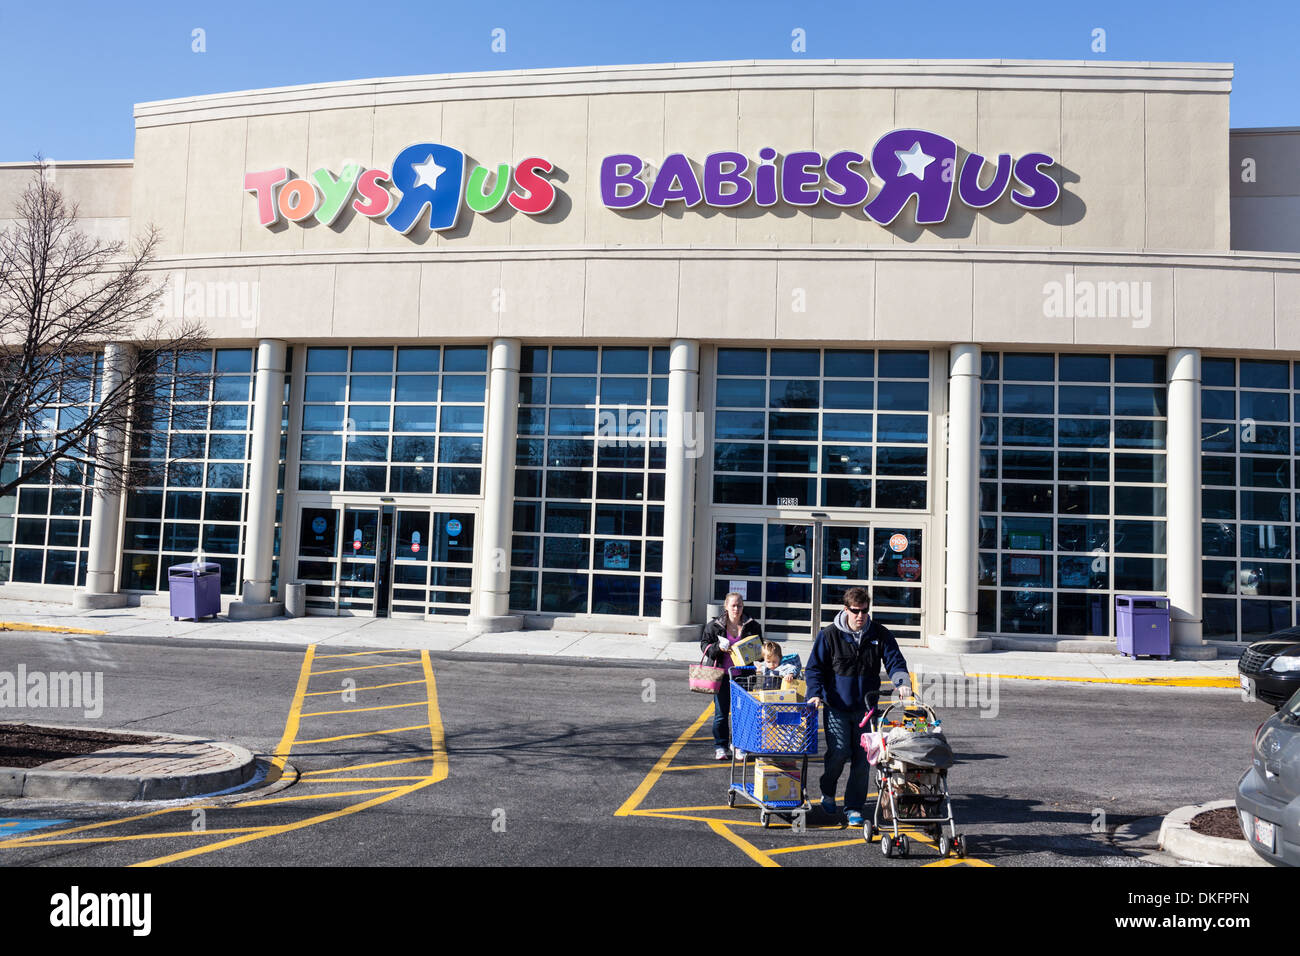 Toys R uns Babies R Us Box Store, Towson, Maryland, Baltimore County. Stockfoto